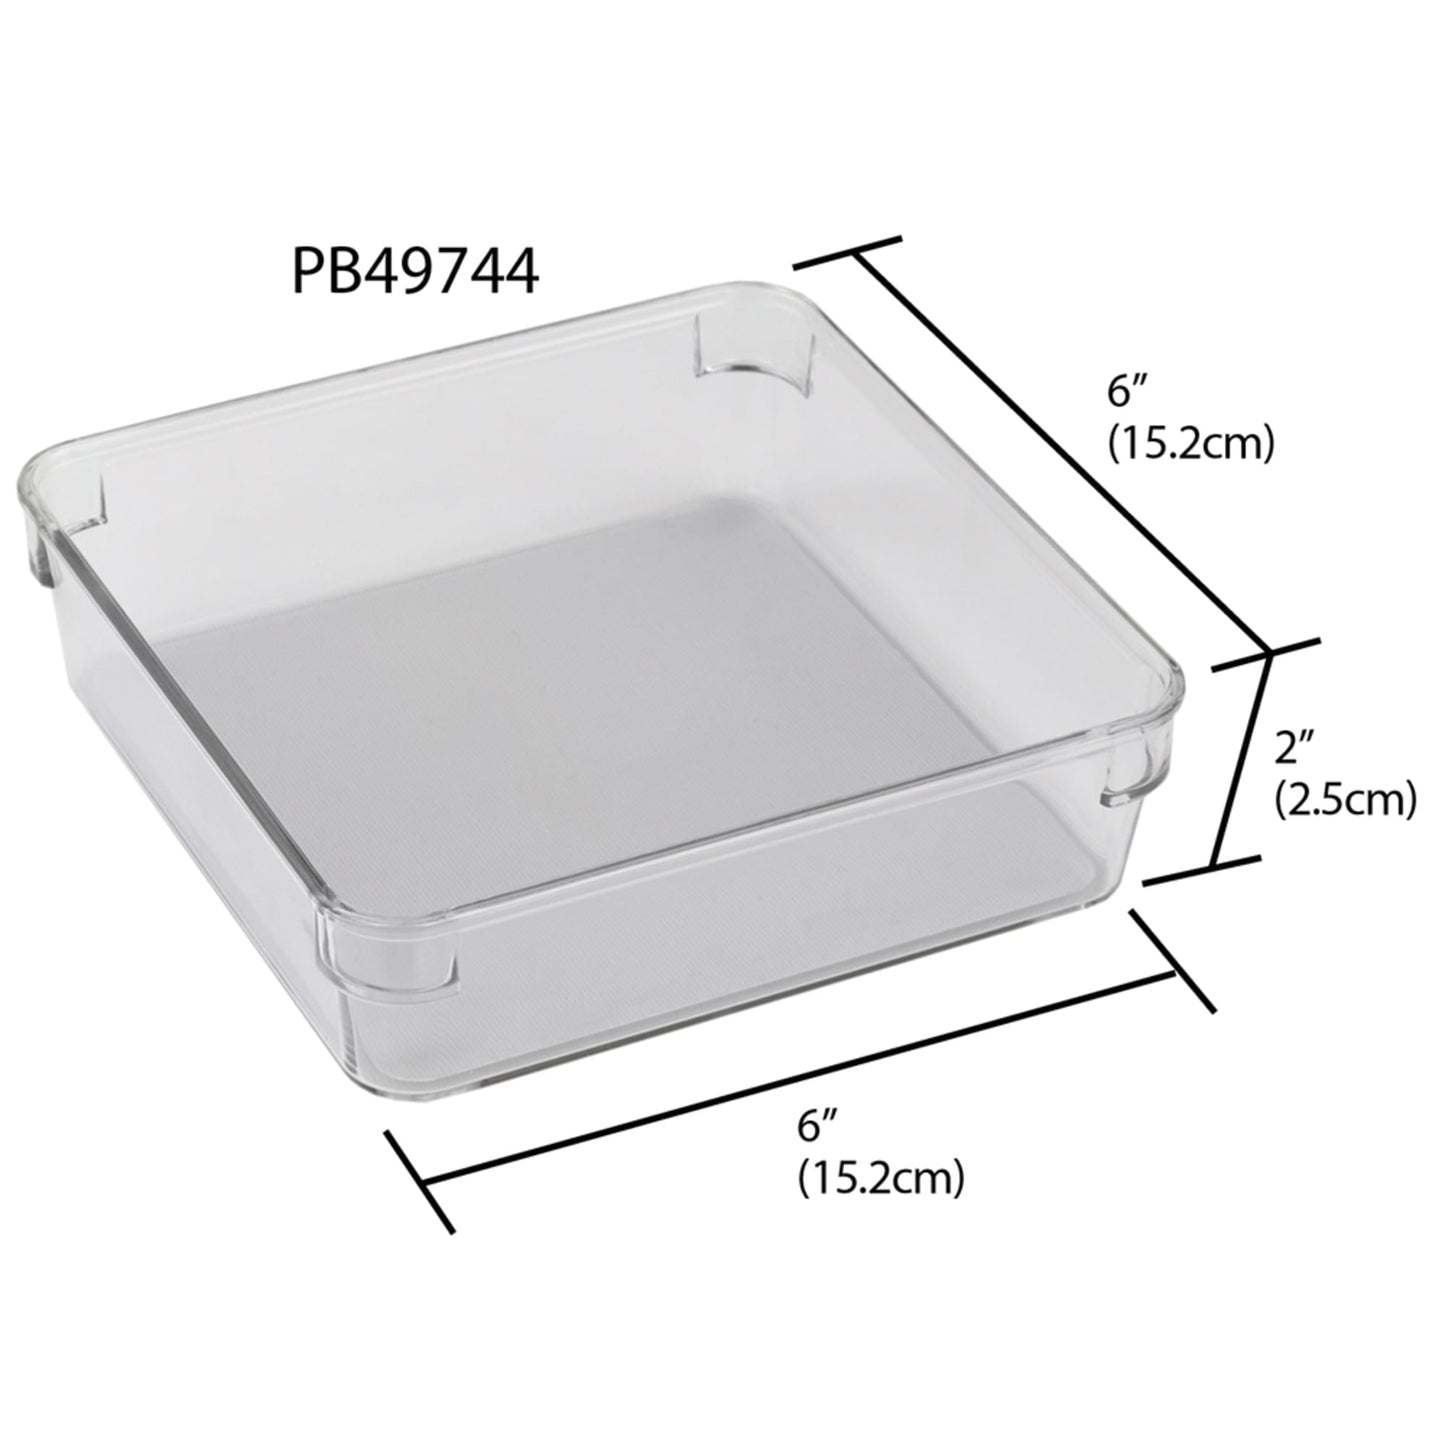 6" x 6" x 2" Plastic Drawer Organizer with Rubber Liner